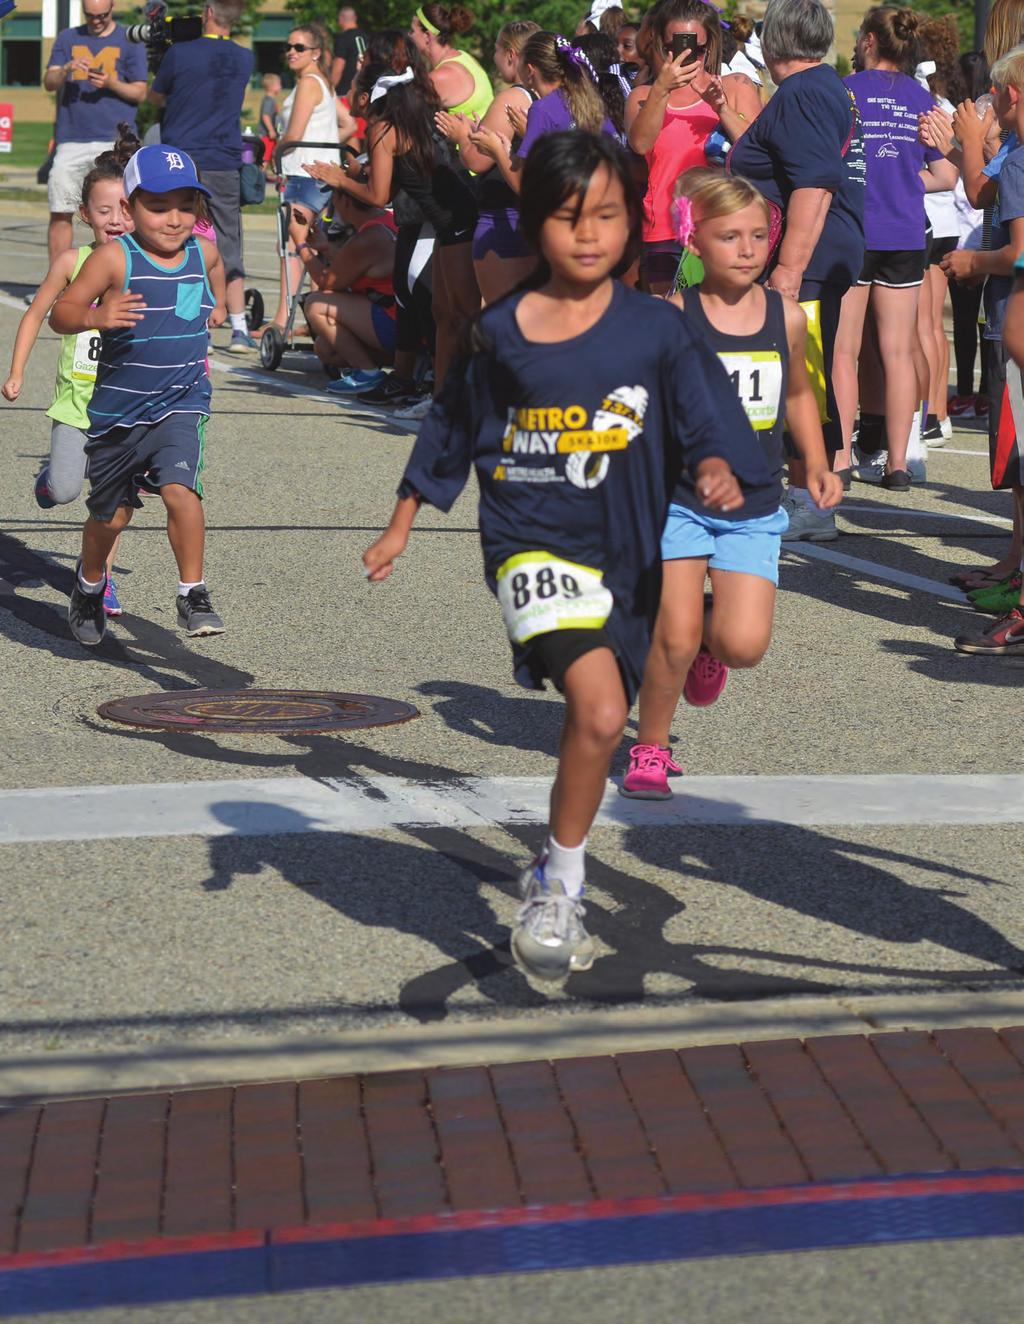 2017 METRO WAY 5K & 10K FAMILY FUN RUN July 26, 2018 Metro Health Village Green 6:00 pm This family-friendly event welcomes nearly 1,000 people of